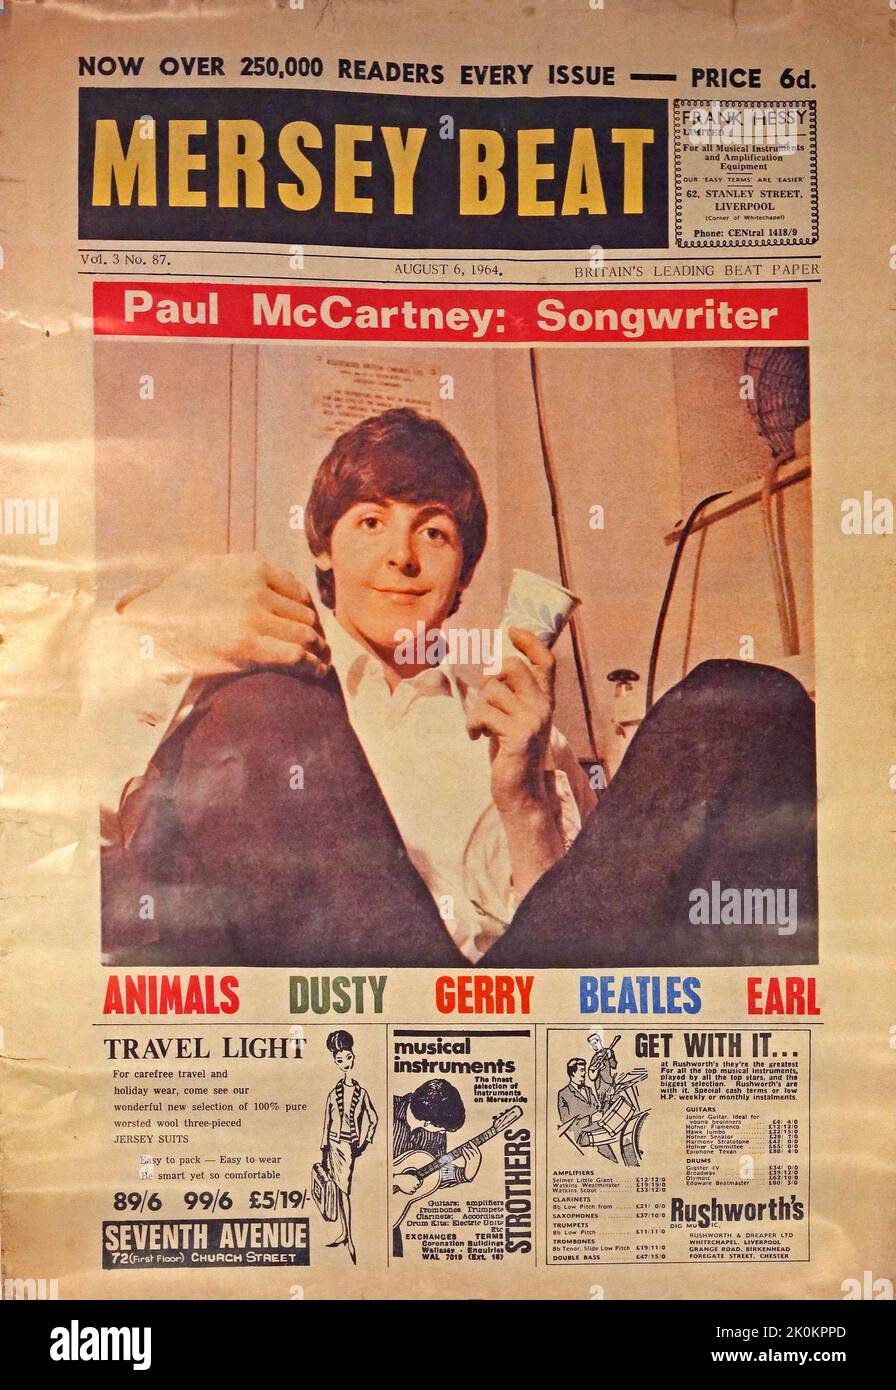 Paul McCartney songwriter, on the cover of the Mersey Beat magazine, 06-Aug-1964 by Bill Harry Stock Photo